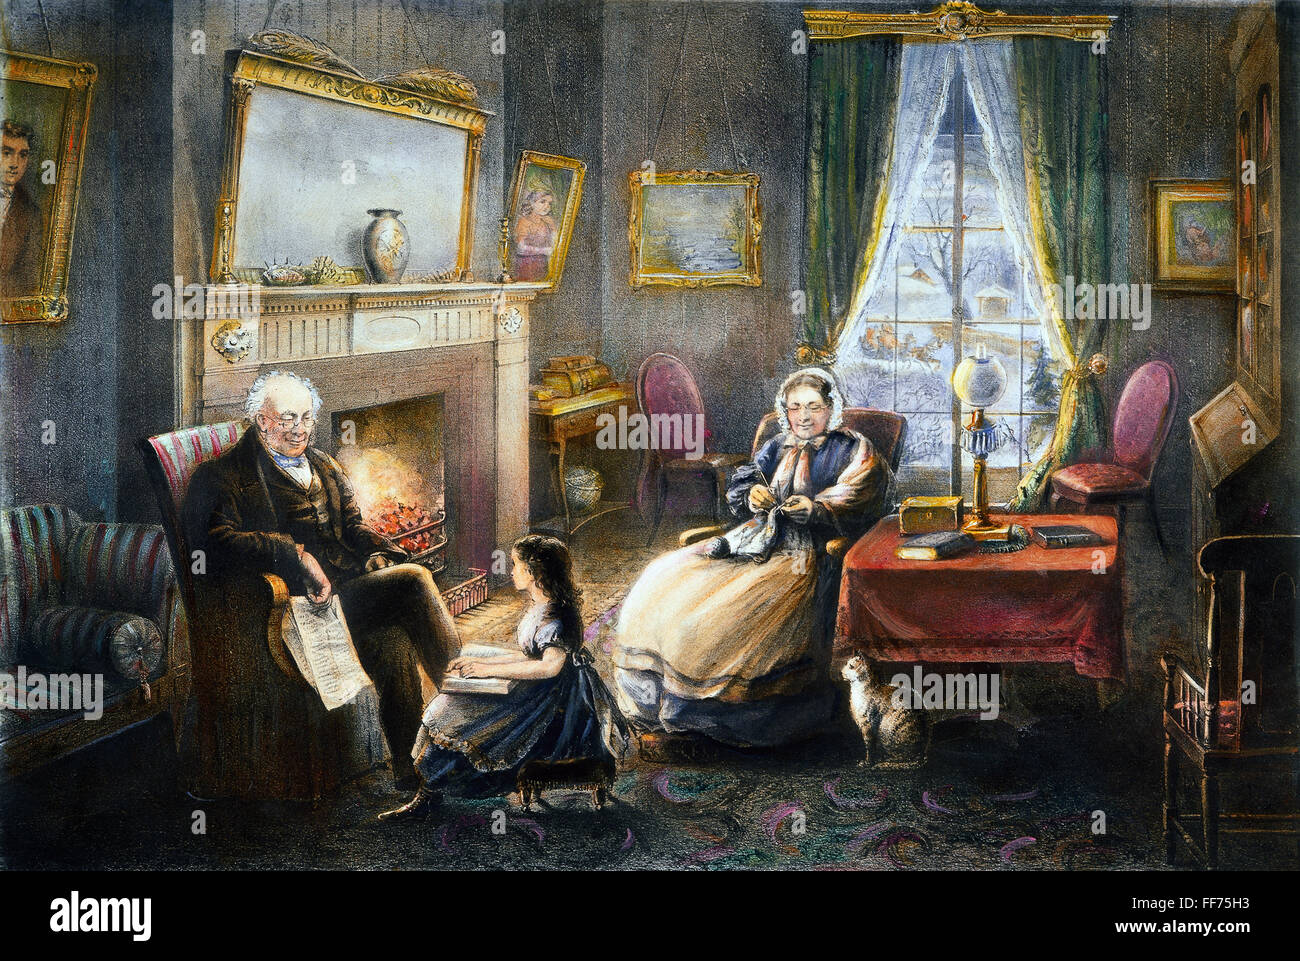 OLD AGE, 1868. /n'The Four Seasons of Life/Old Age (The Season of Rest).' Lithograph, 1868, by Currier & Ives. Stock Photo